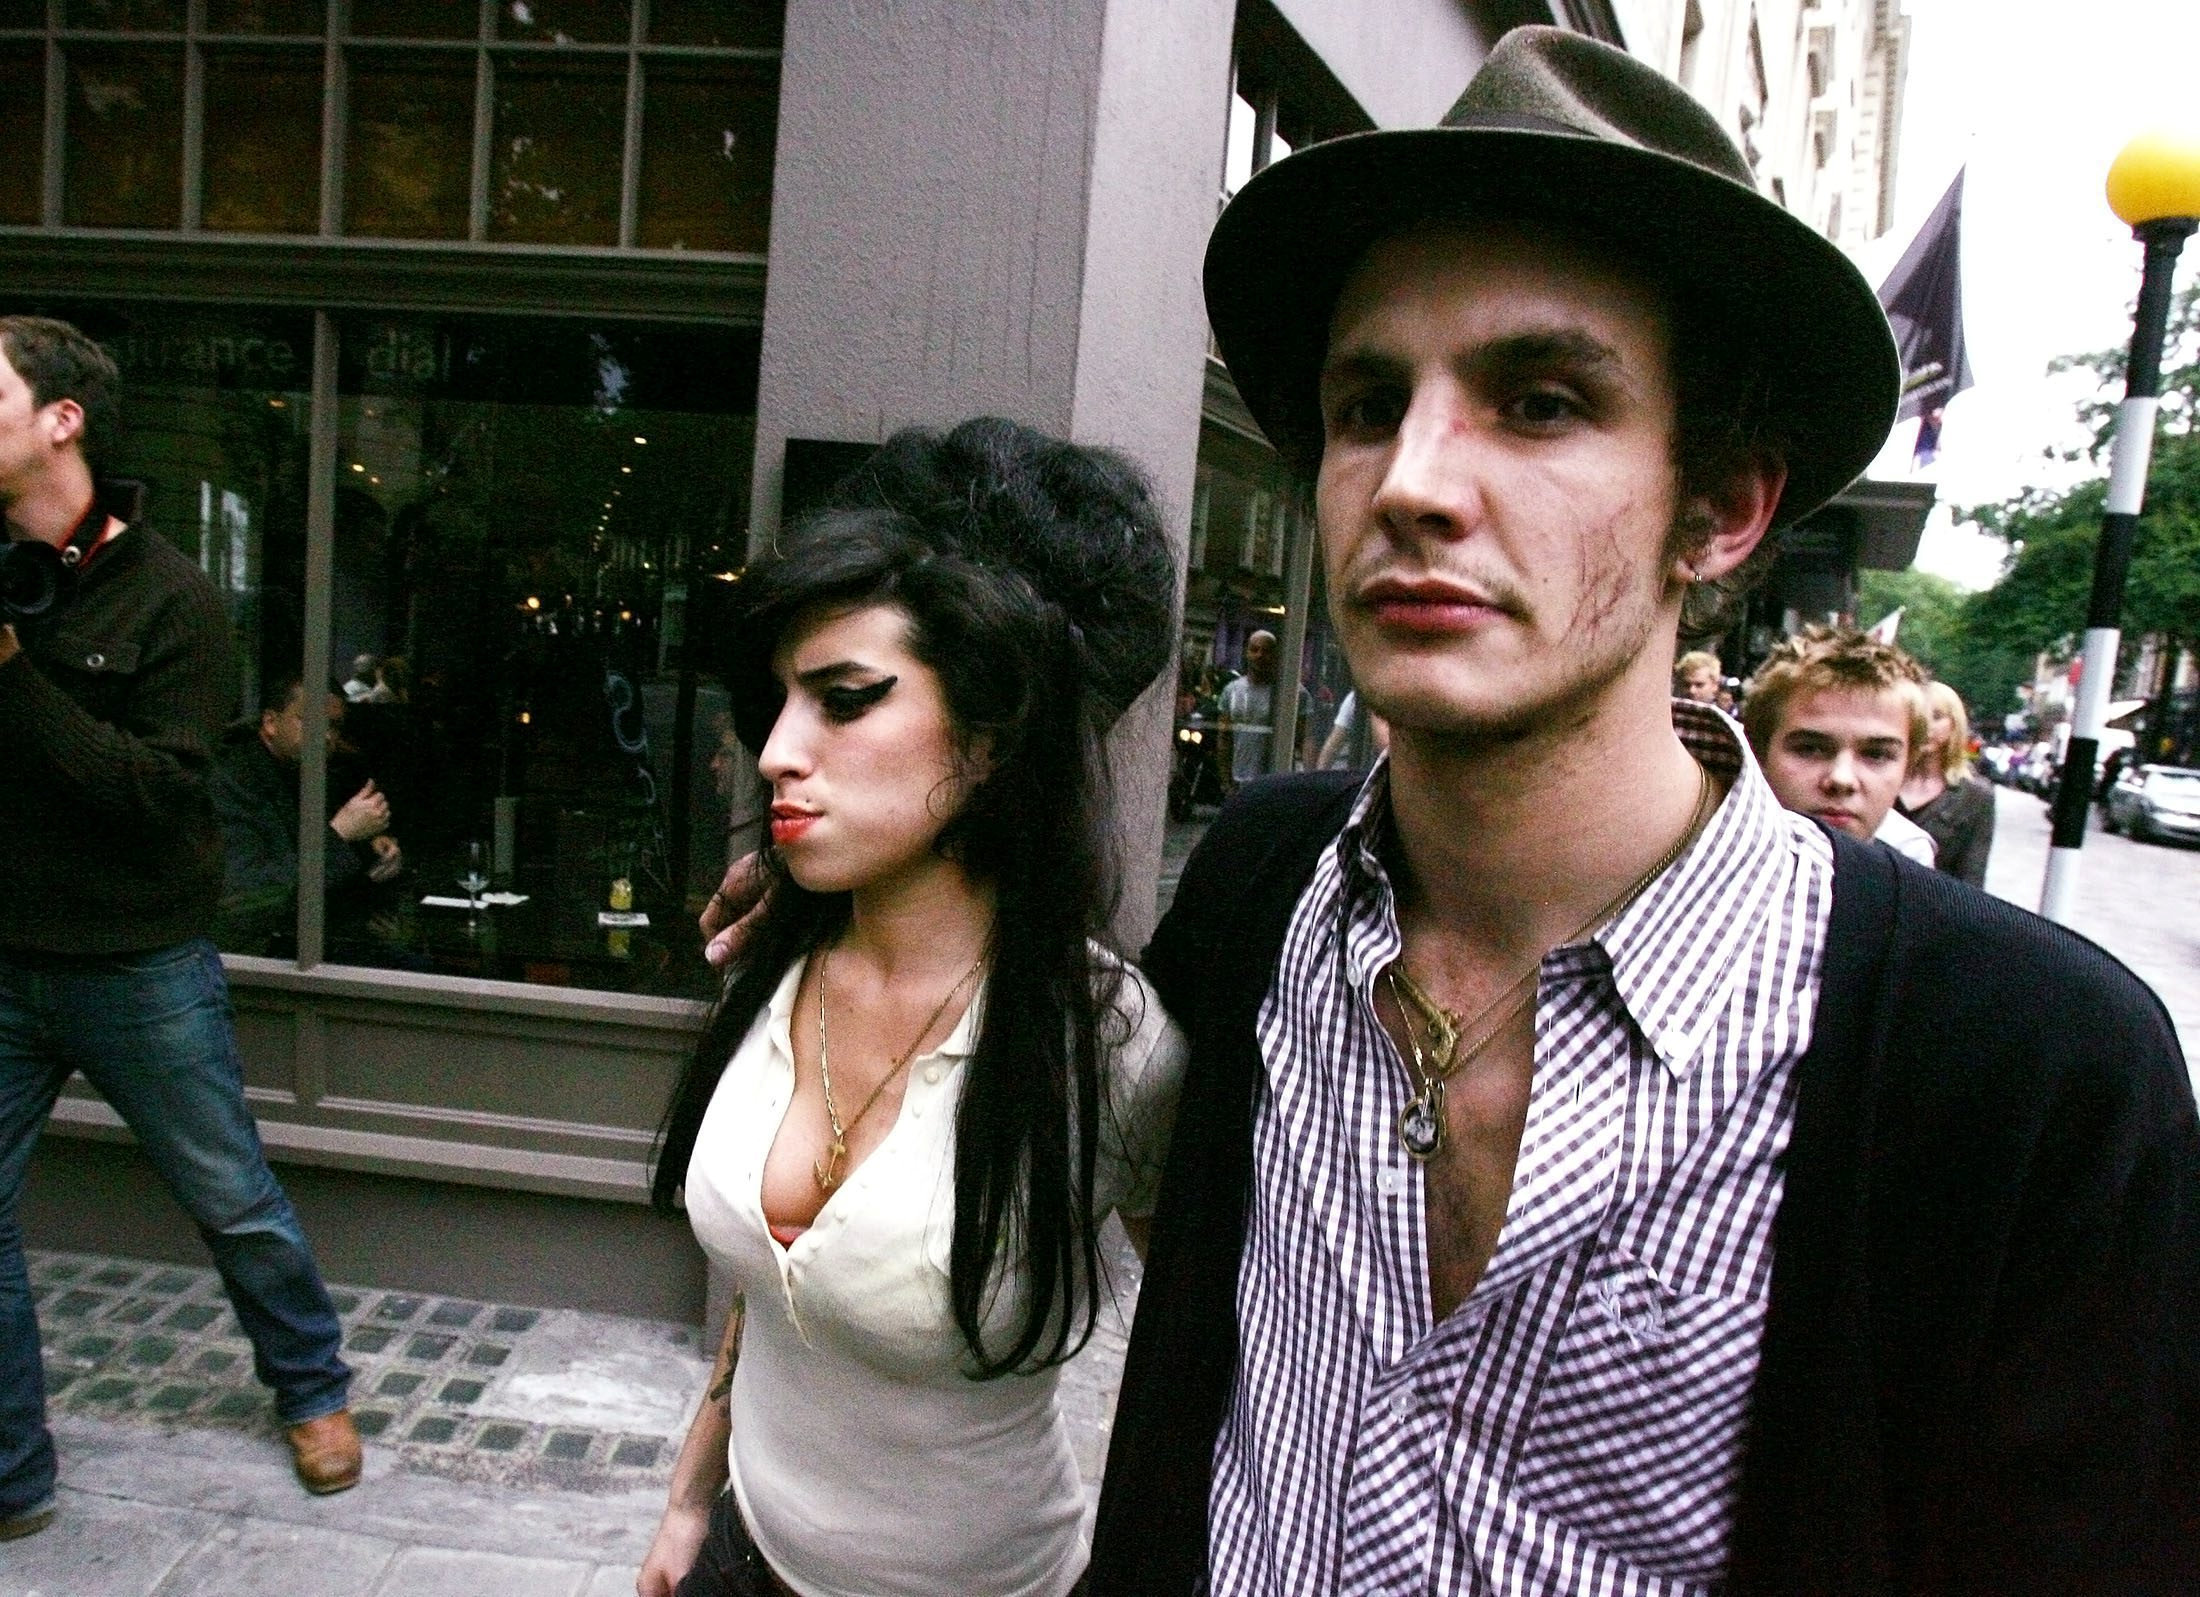 Singer Amy Winehouse and husband Blake Fielder-Civil. (file photo) See SWNS story SWCCoverdose. The ex-husband of Amy Winehouse suffered another family tragedy when his younger brother died of a drugs overdose, it has emerged. Freddy Civil, the younger brother of the singer's former lover Blake Civil-Fielder, died last year after a heroin overdose, an inquest heard. Jurors were told Freddy, 27, absconded from a mental health hospital before checking into a �40-a-night B&B in Leeds, where he administered the fatal dose of drugs. Medics were called to the hotel, where Freddy was staying with a friend, and found him face down in just his underpants and he was tragically pronounced dead at the scene.,Image: 739409710, License: Rights-managed, Restrictions: This image is not available for use at a stock rate unless with prior agreement. This image hereby disclosed to your organisation is so disclosed on the condition that your organisation will take all steps necessary to ensure that any identifiable personal data is processed in full compliance with the Data Protection Act 2018

follow us on twitter - @swns
browse our website - swns.com
email pix@swns.com, Model Release: no, Credit line: SWNS / SWNS / Profimedia